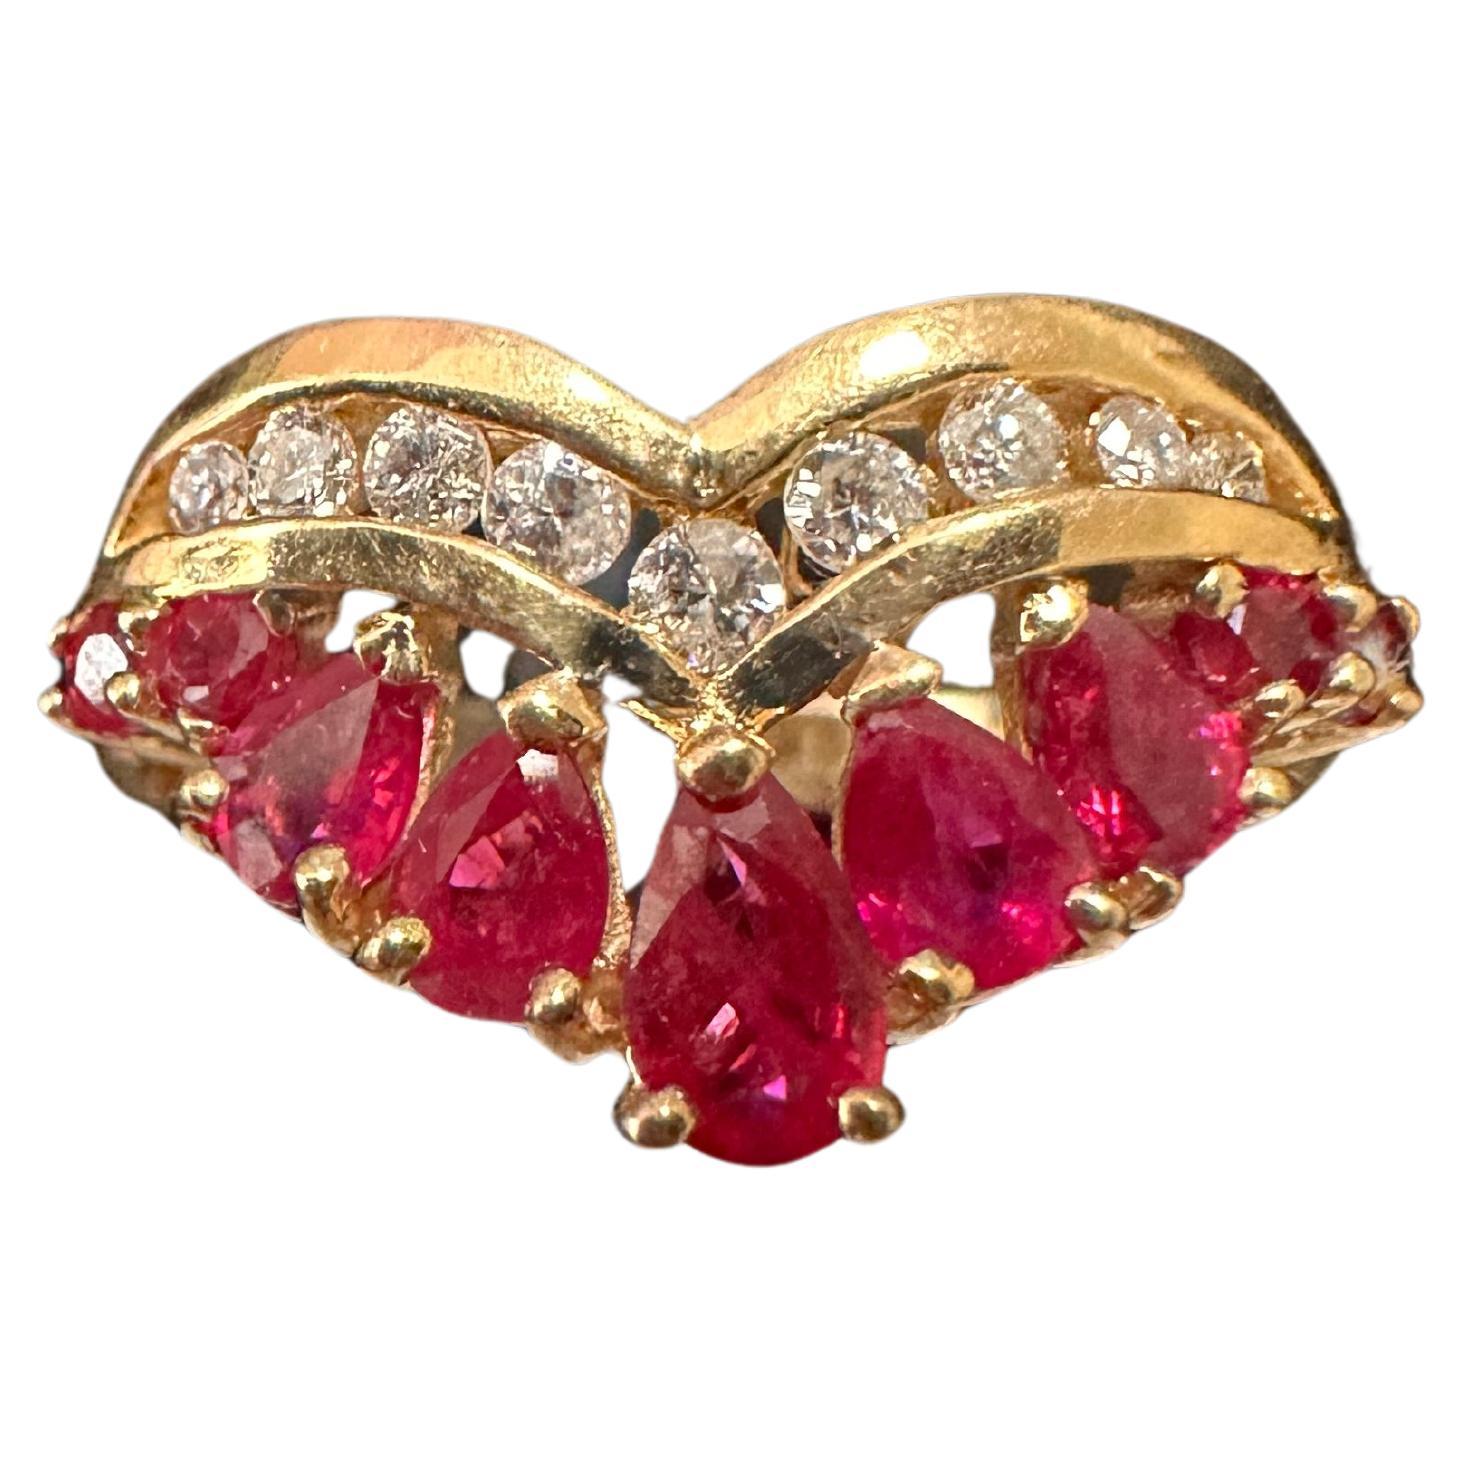 14k Yellow Gold ~ 5 Pear Shape + 2 Round Rubies ~ 9 Diamonds Ring Size 6 1/4

This stunning 14k yellow gold ring features five graduating pear-shaped + two round natural rubies, accompanied by 9 round diamonds, set in a prong and channel setting